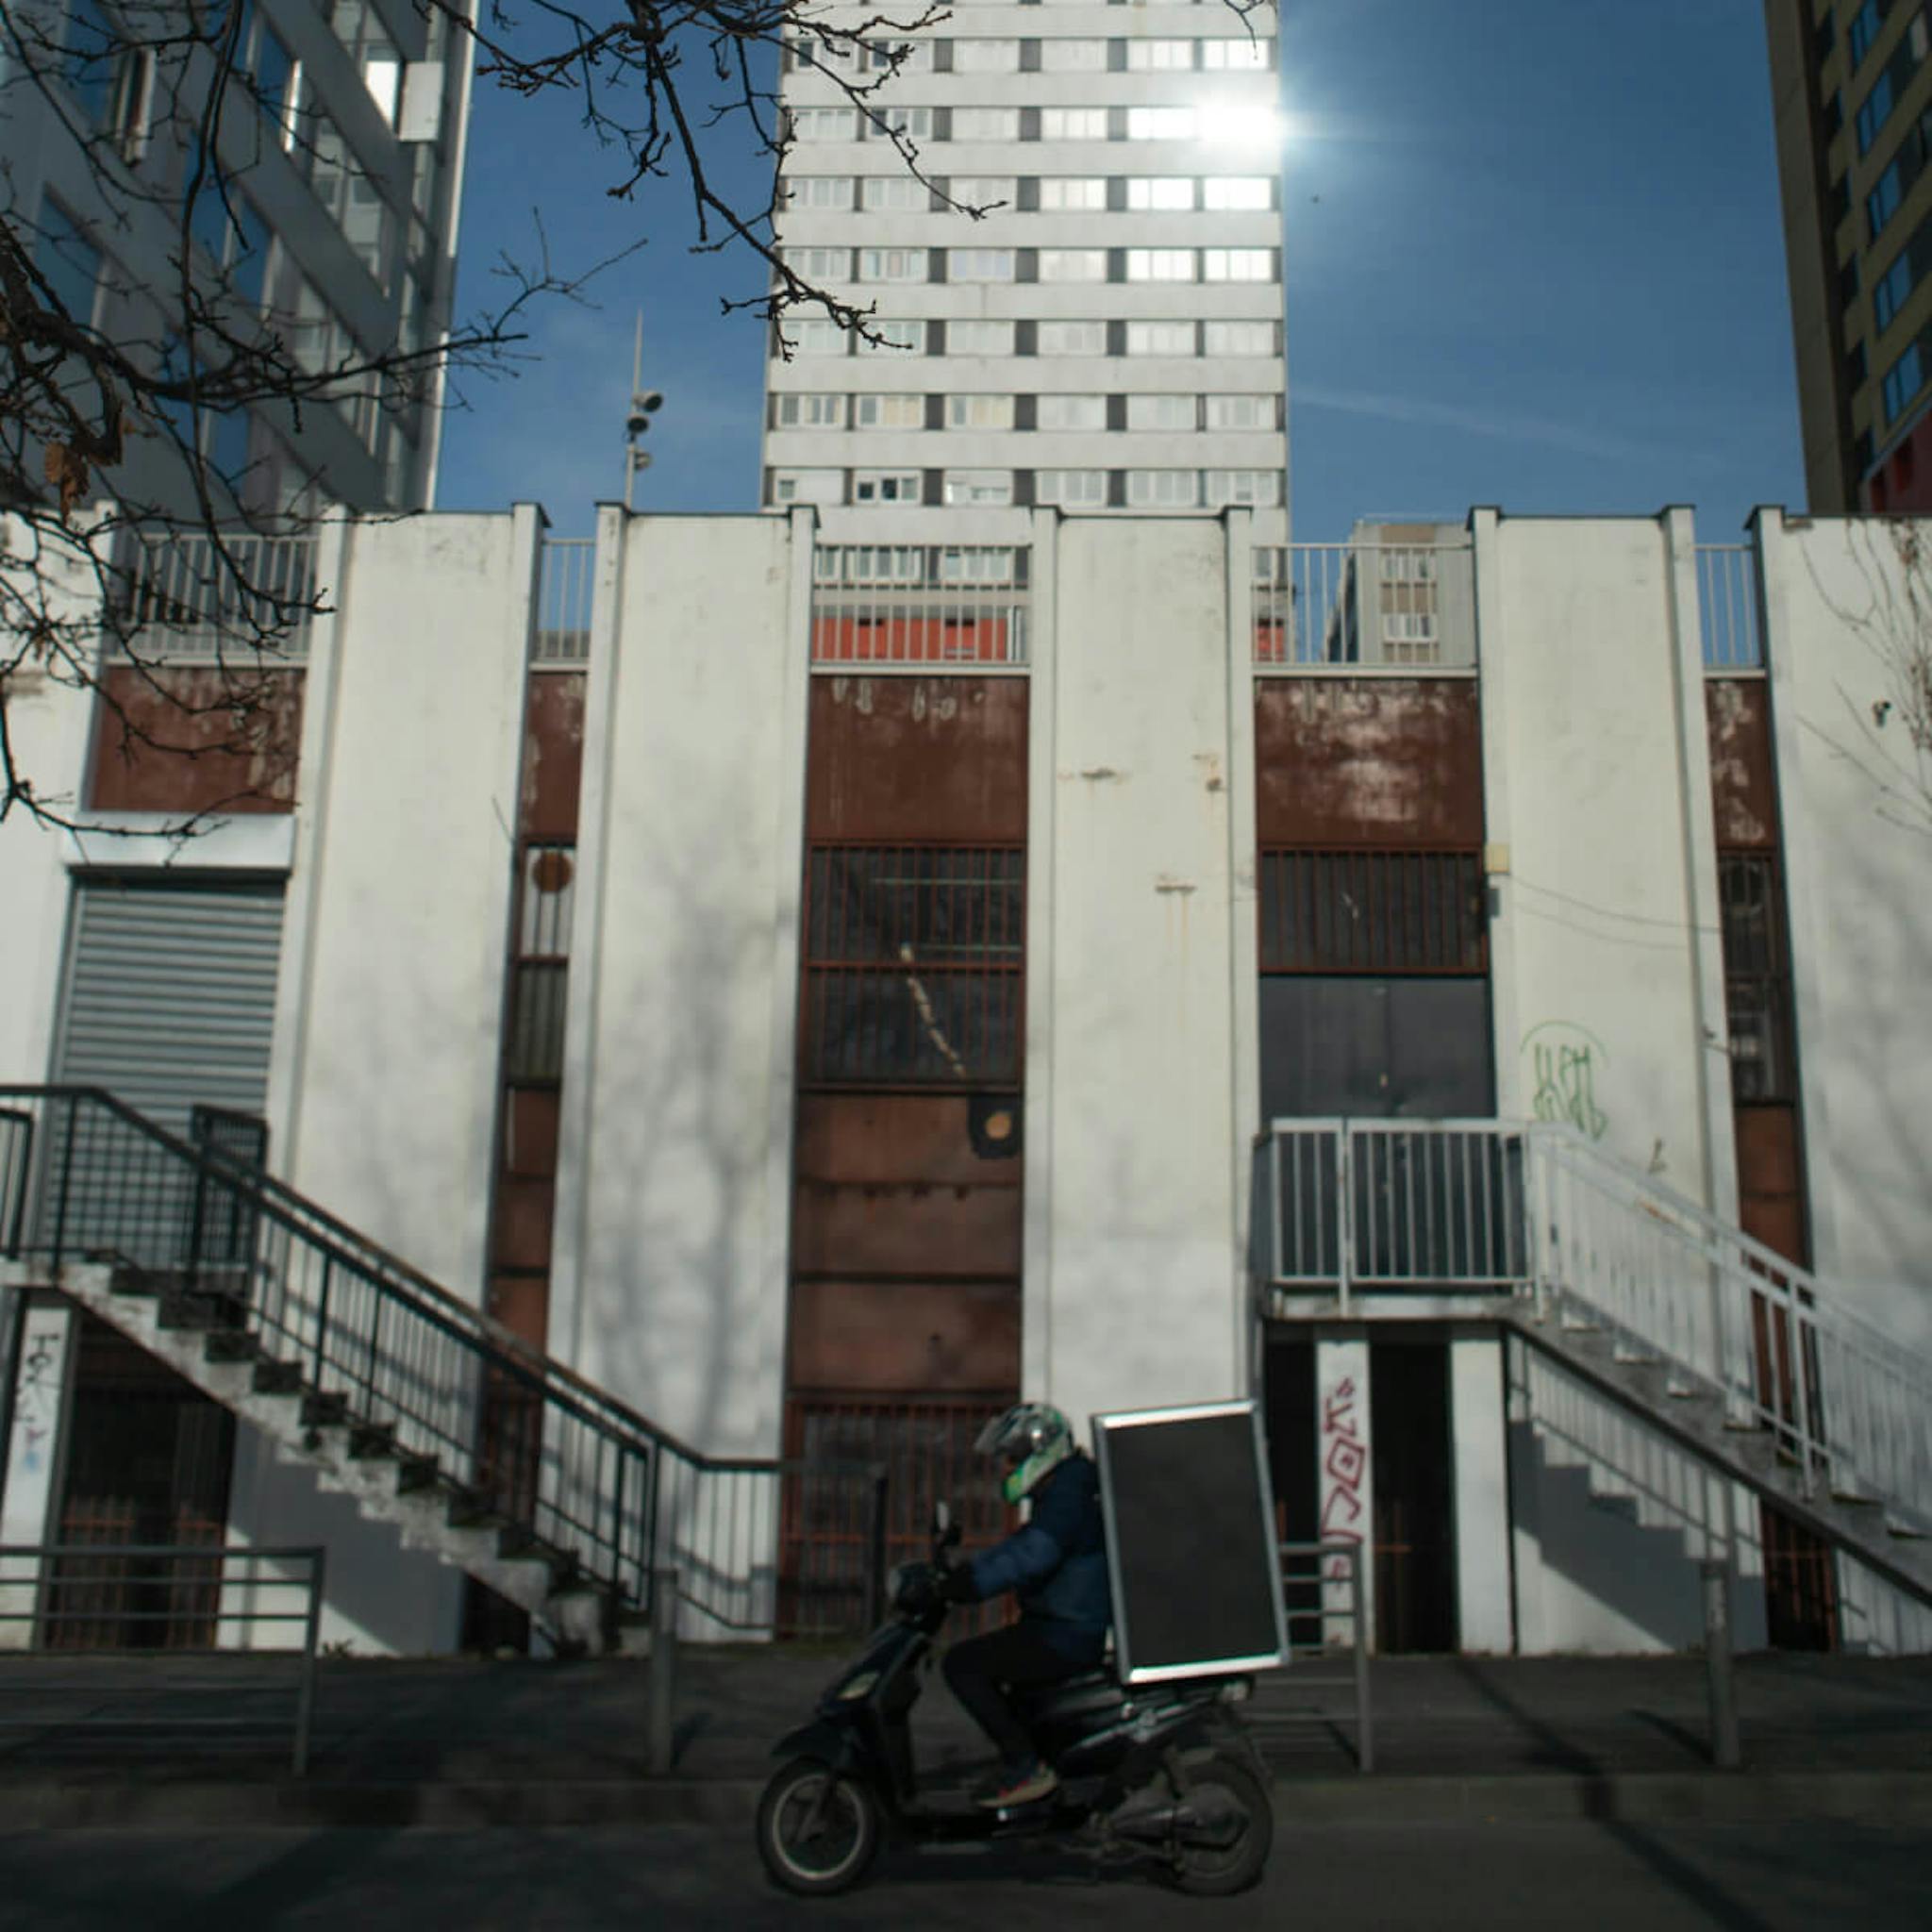 A delivery person on a scooter carrying a large insulated box passes in front of a stark urban building